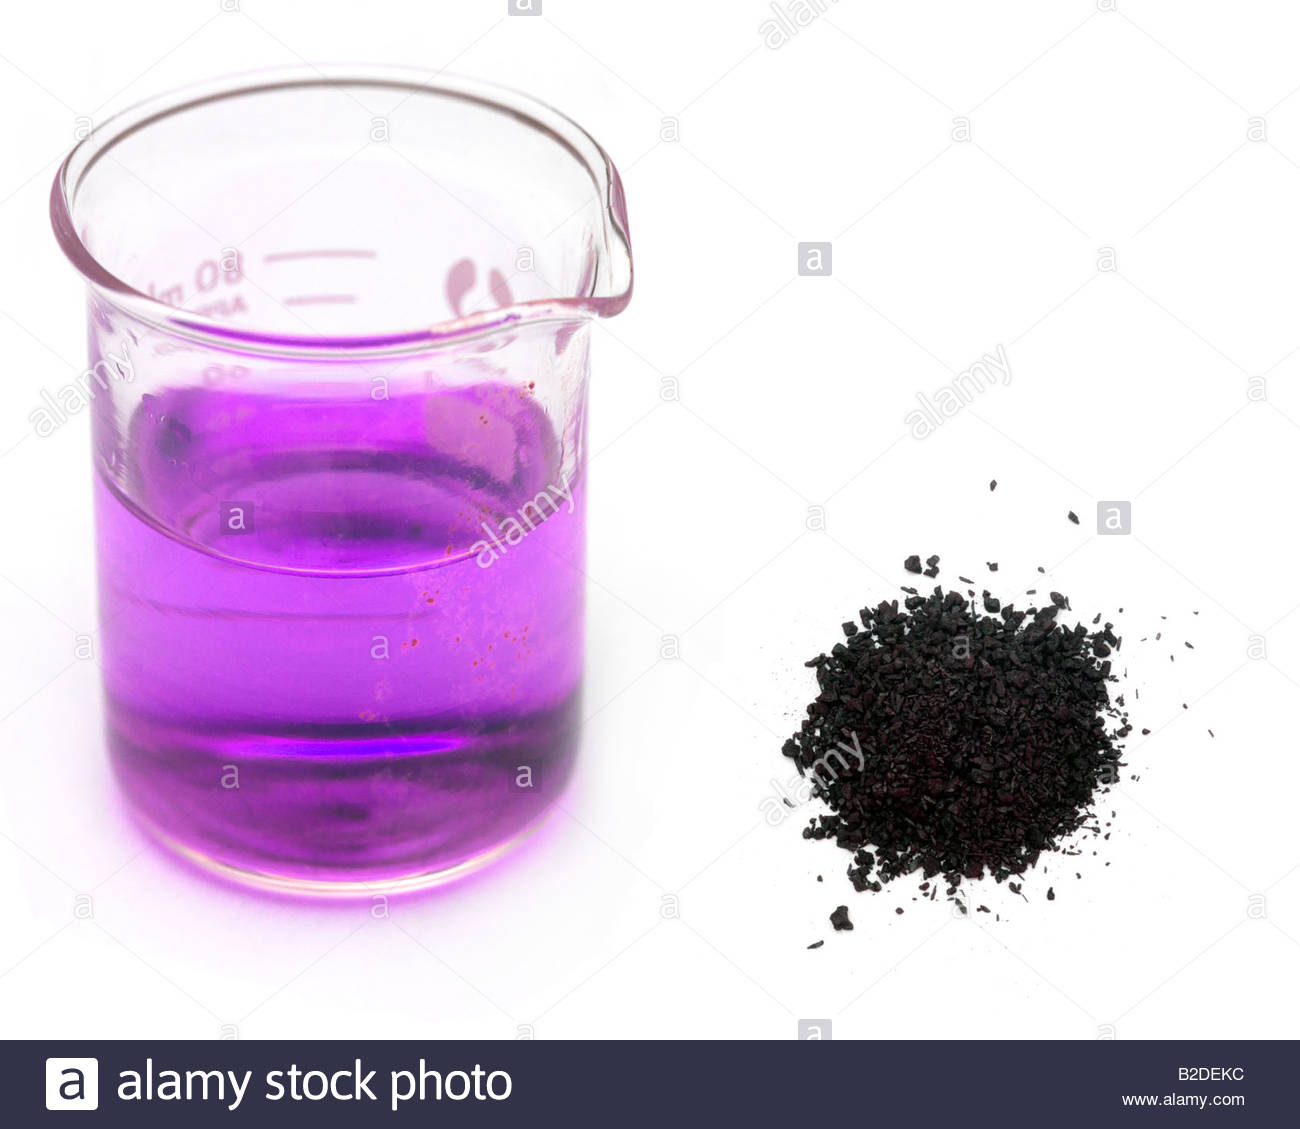 http://www.alamy.com/stock-photo-crystals-of-potassium-permanganate-and-a-beaker-containing-purple-18736576.html